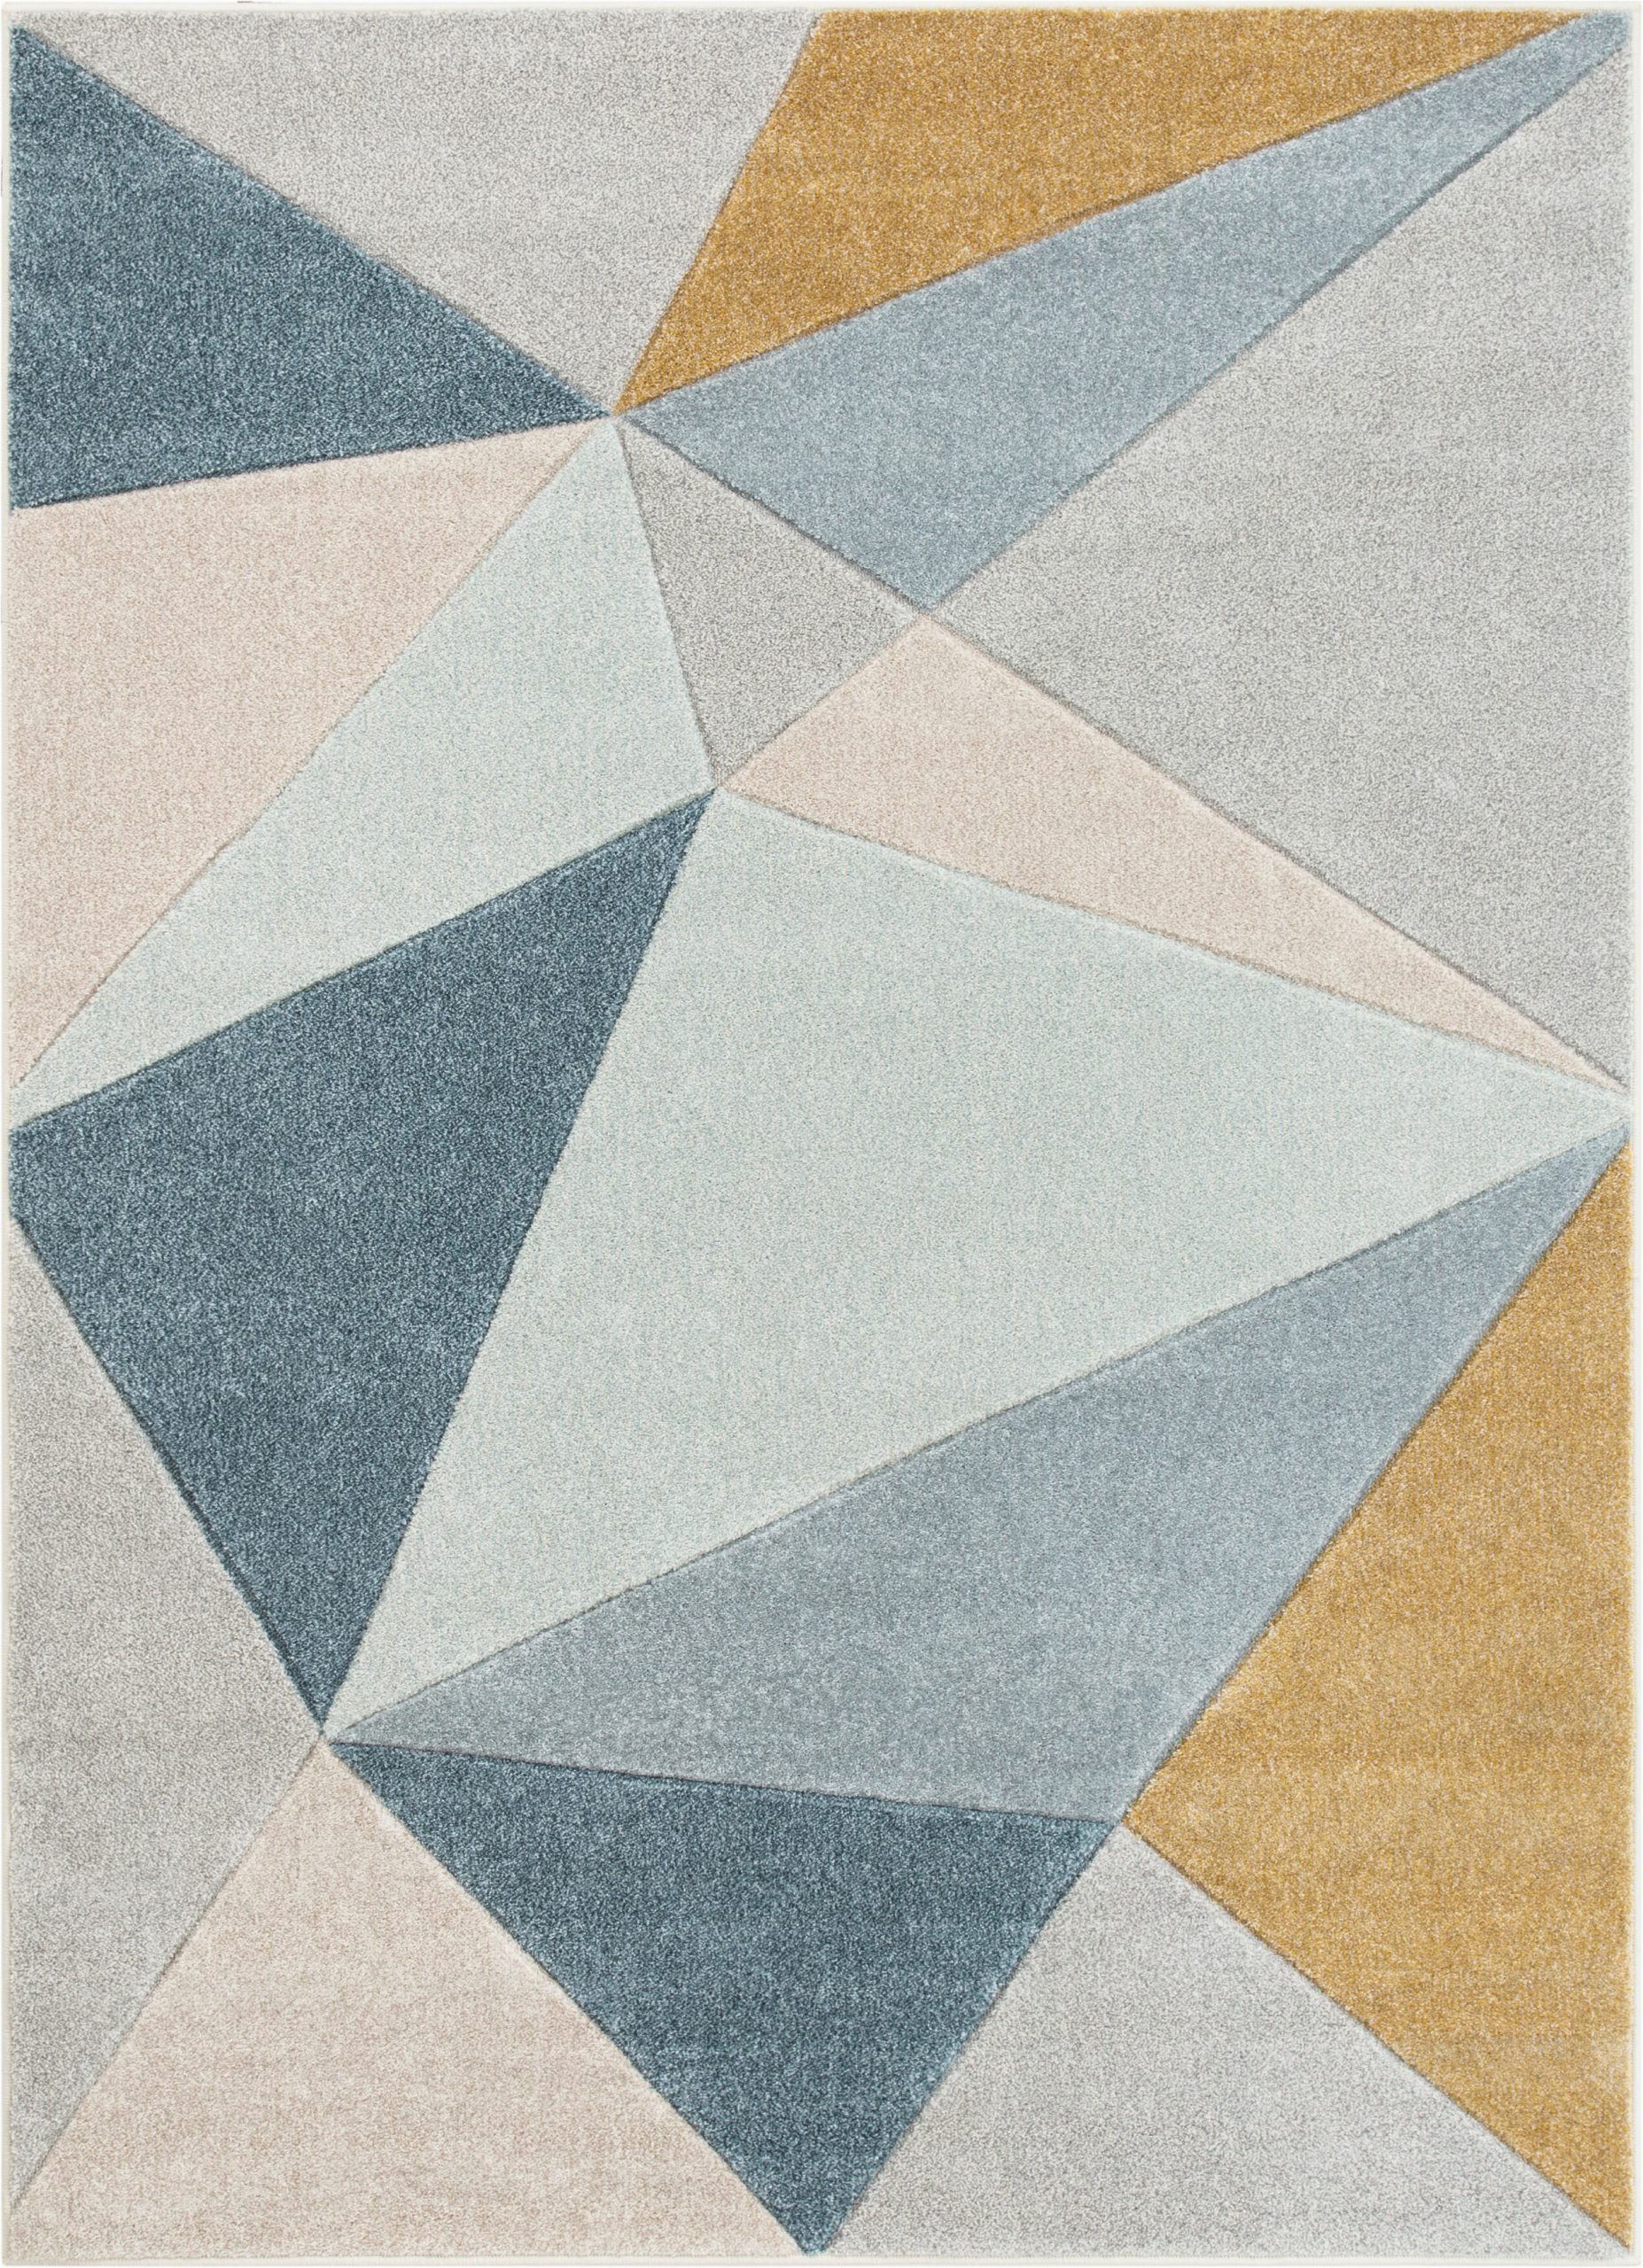 Mid Century Modern area Rugs for Sale Ruby Tamara Mid Century Modern Abstract Geometric Teal Blue Gray Gold area Rug